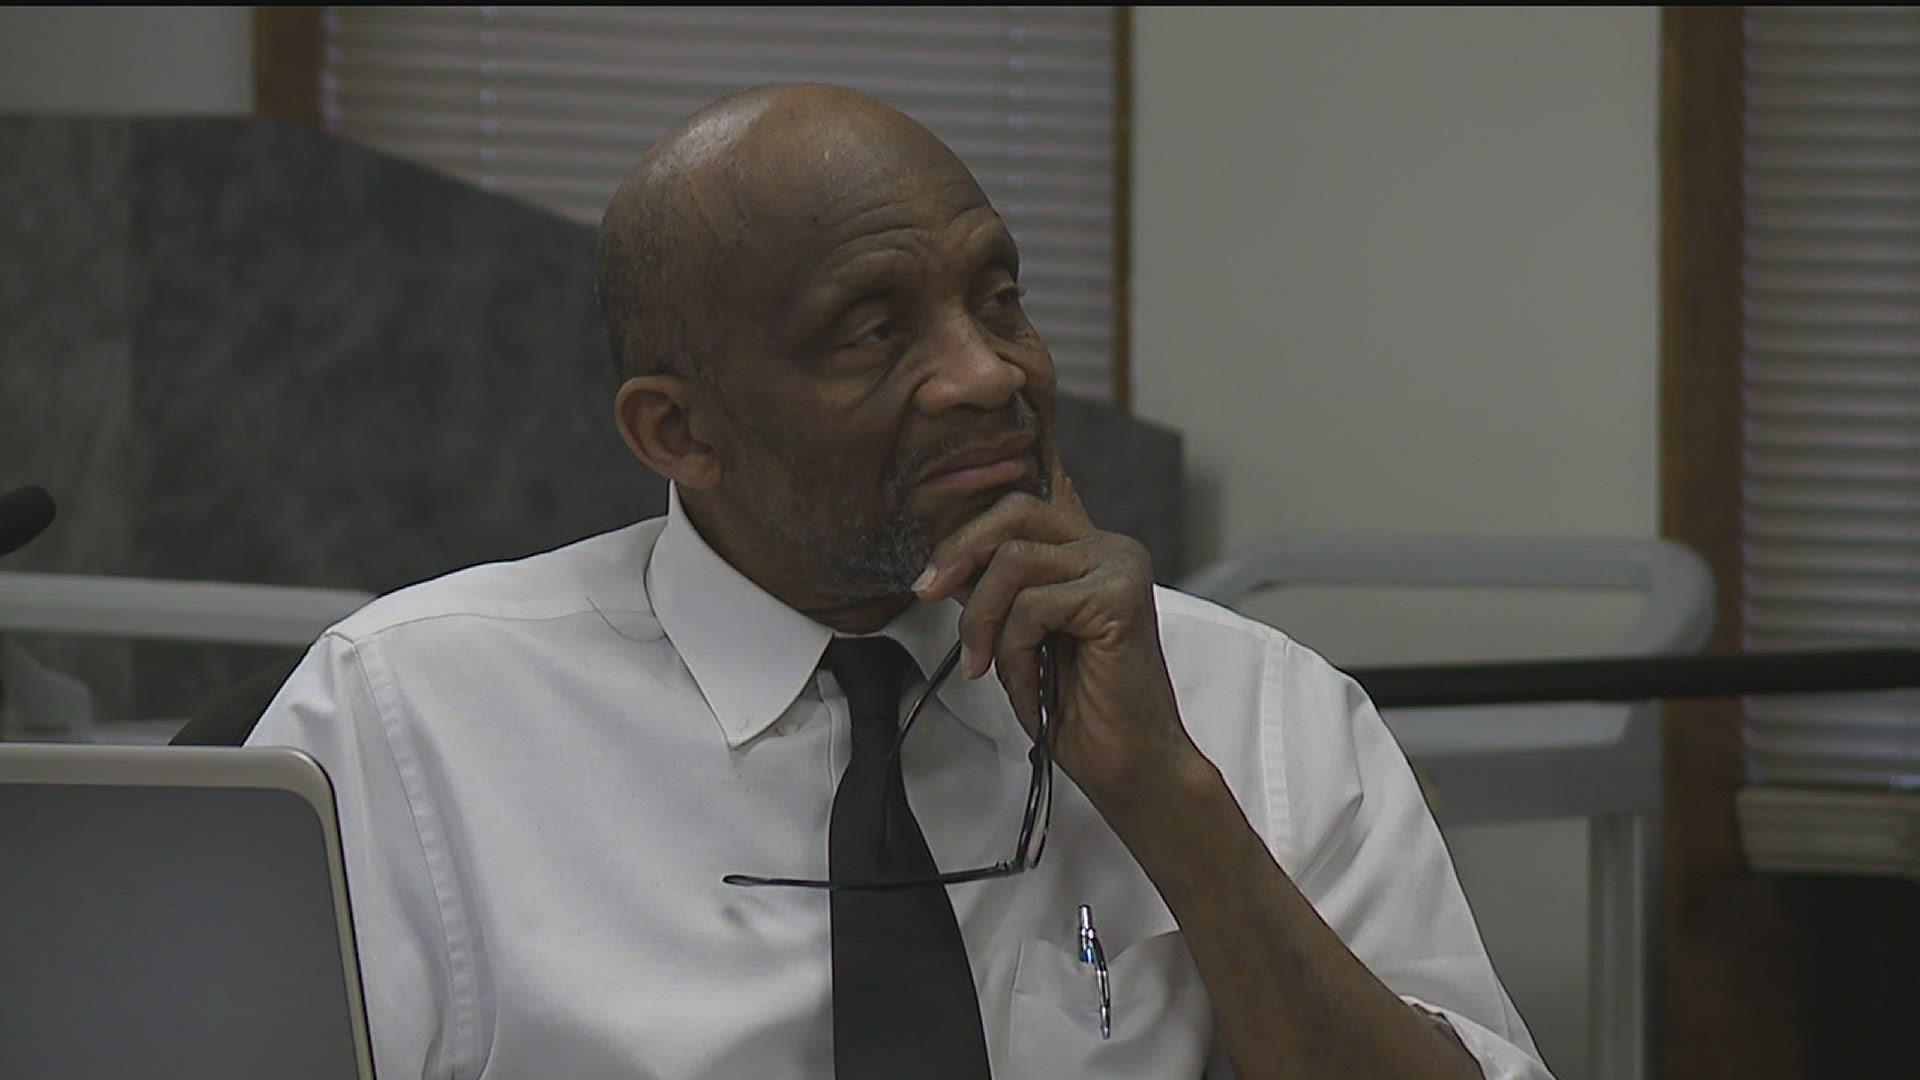 The longtime leader Clyde Mayfield's family remembers him as an 'incredibly' selfless man.